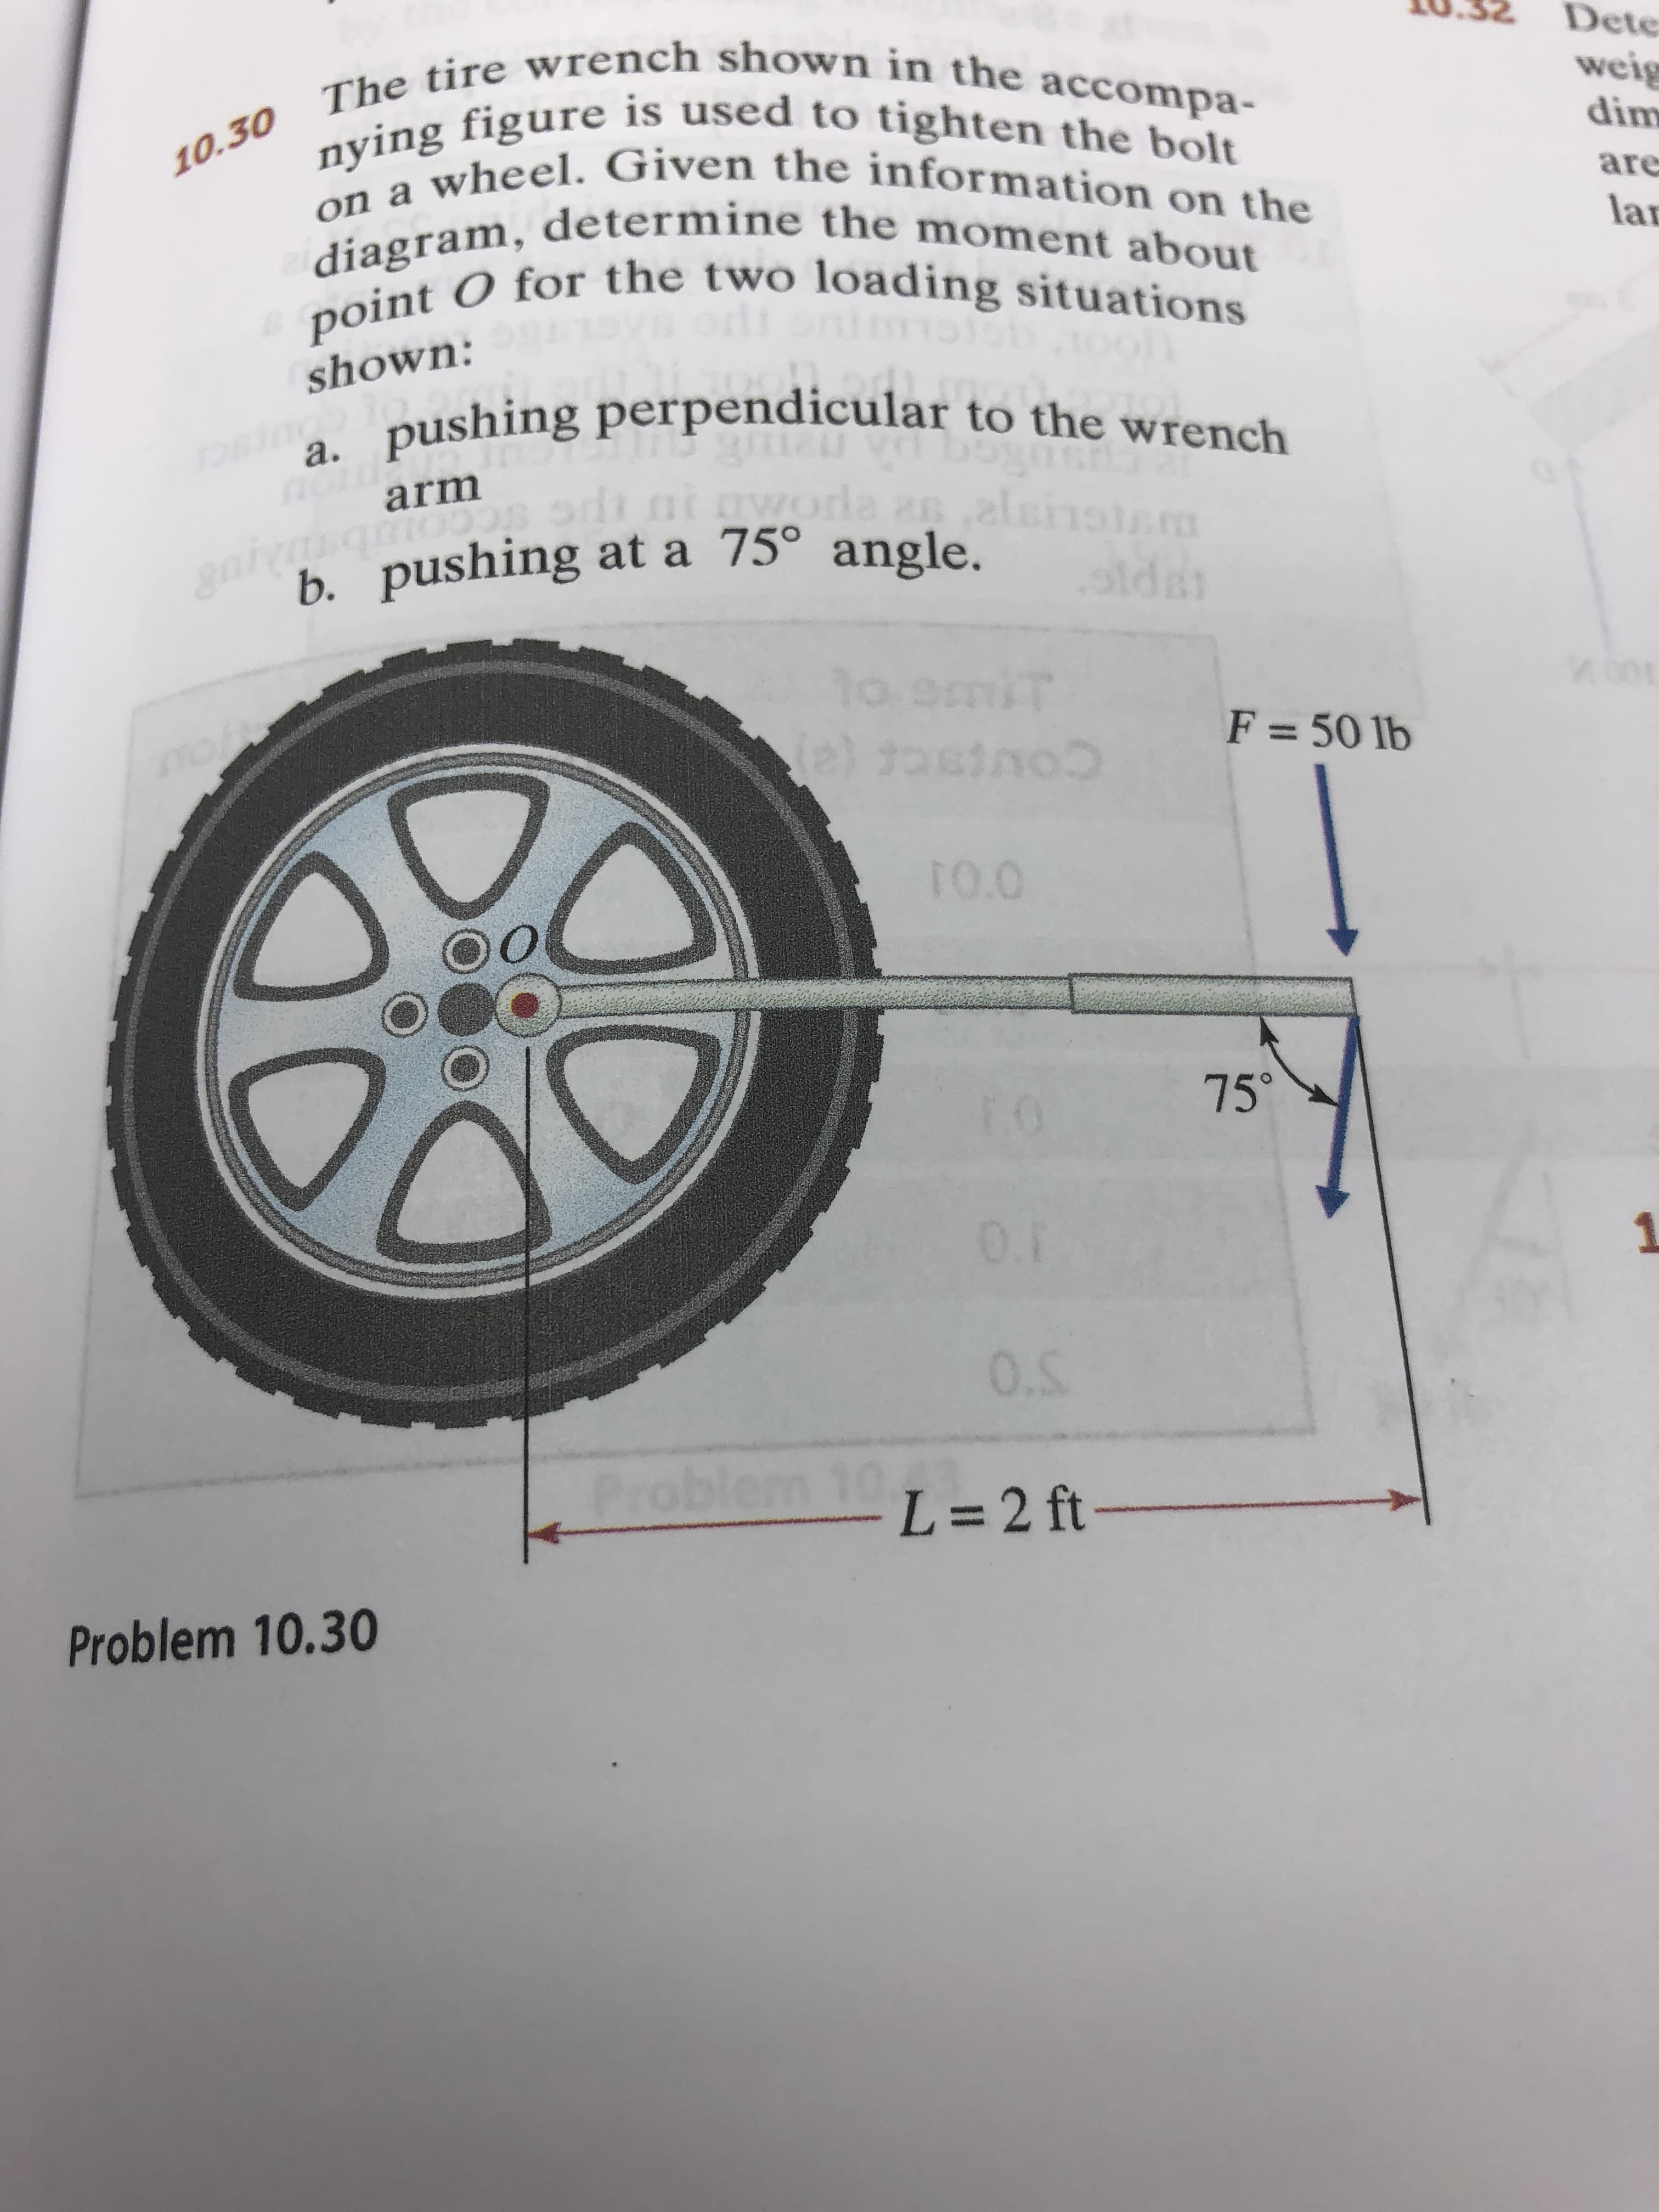 Dete
10.30 The tire wrench shown in the accompa-
weig
dim
nying figure is used to tighten the bolt
on a wheel. Given the information on the
diagram, determine the moment about
point O for the two loading situations
are
lar
shown:
pushing perpendicular to the wrench
OBT0os
а.
arm
da
28.2lsrois
icco
h. pushing at a 75° angle.
aw
sidar
10 9
mt
F= 50 lb
e) to
ToC
notw
TO.O
75
E0
0.1
0.5
Problem 10
L=2 ft-
Problem 10.30
